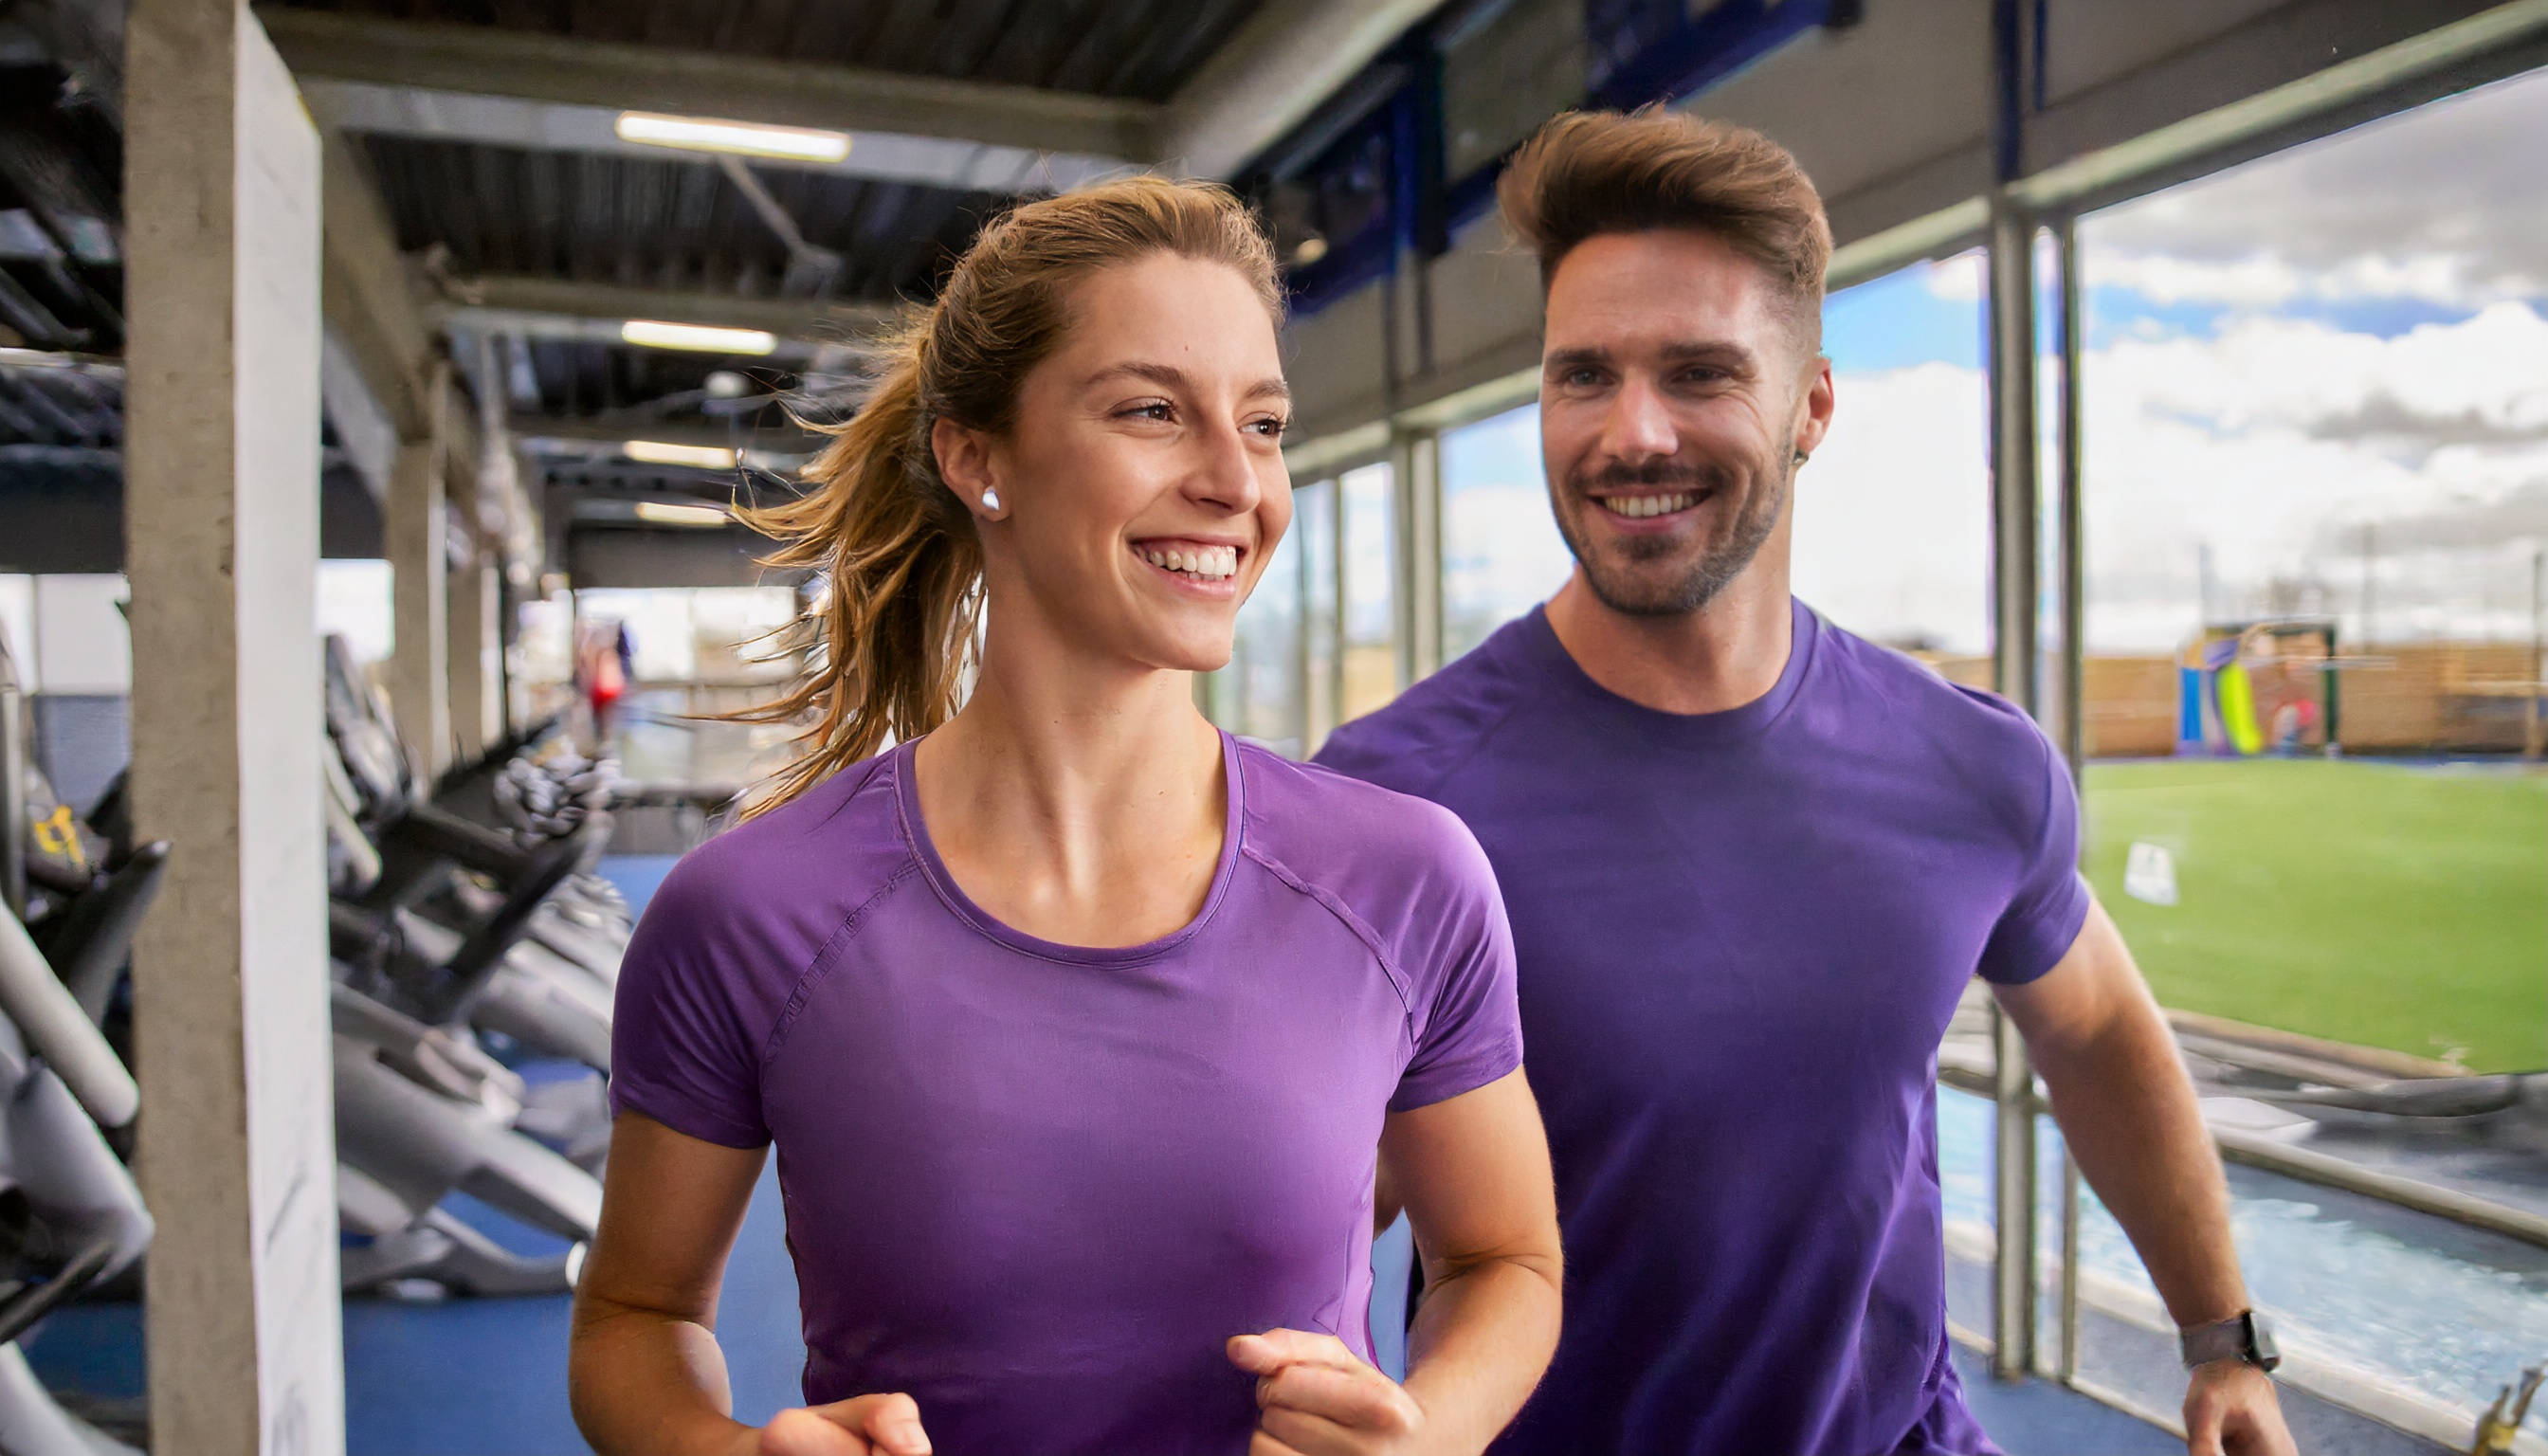 Firefly_happy__smiling_male_and_female_exercisers_coming_out_of_a_gym__purple_clothing_88038.jpg